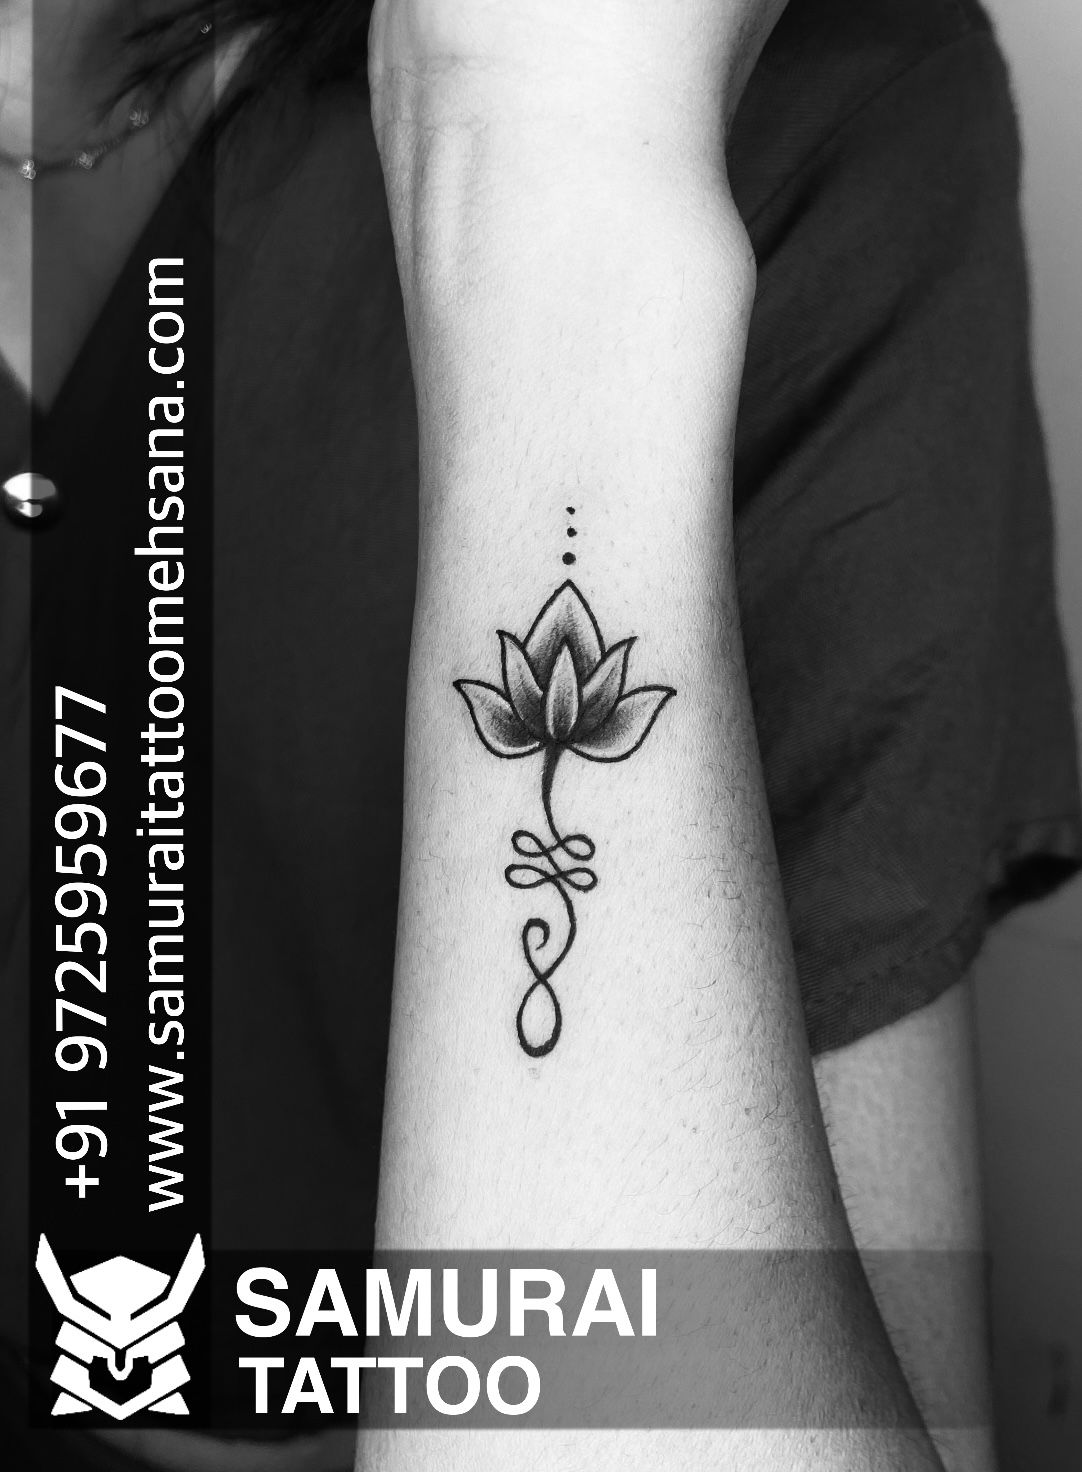 125 Elegant Lotus Tattoo Designs with Meaning | Art and Design